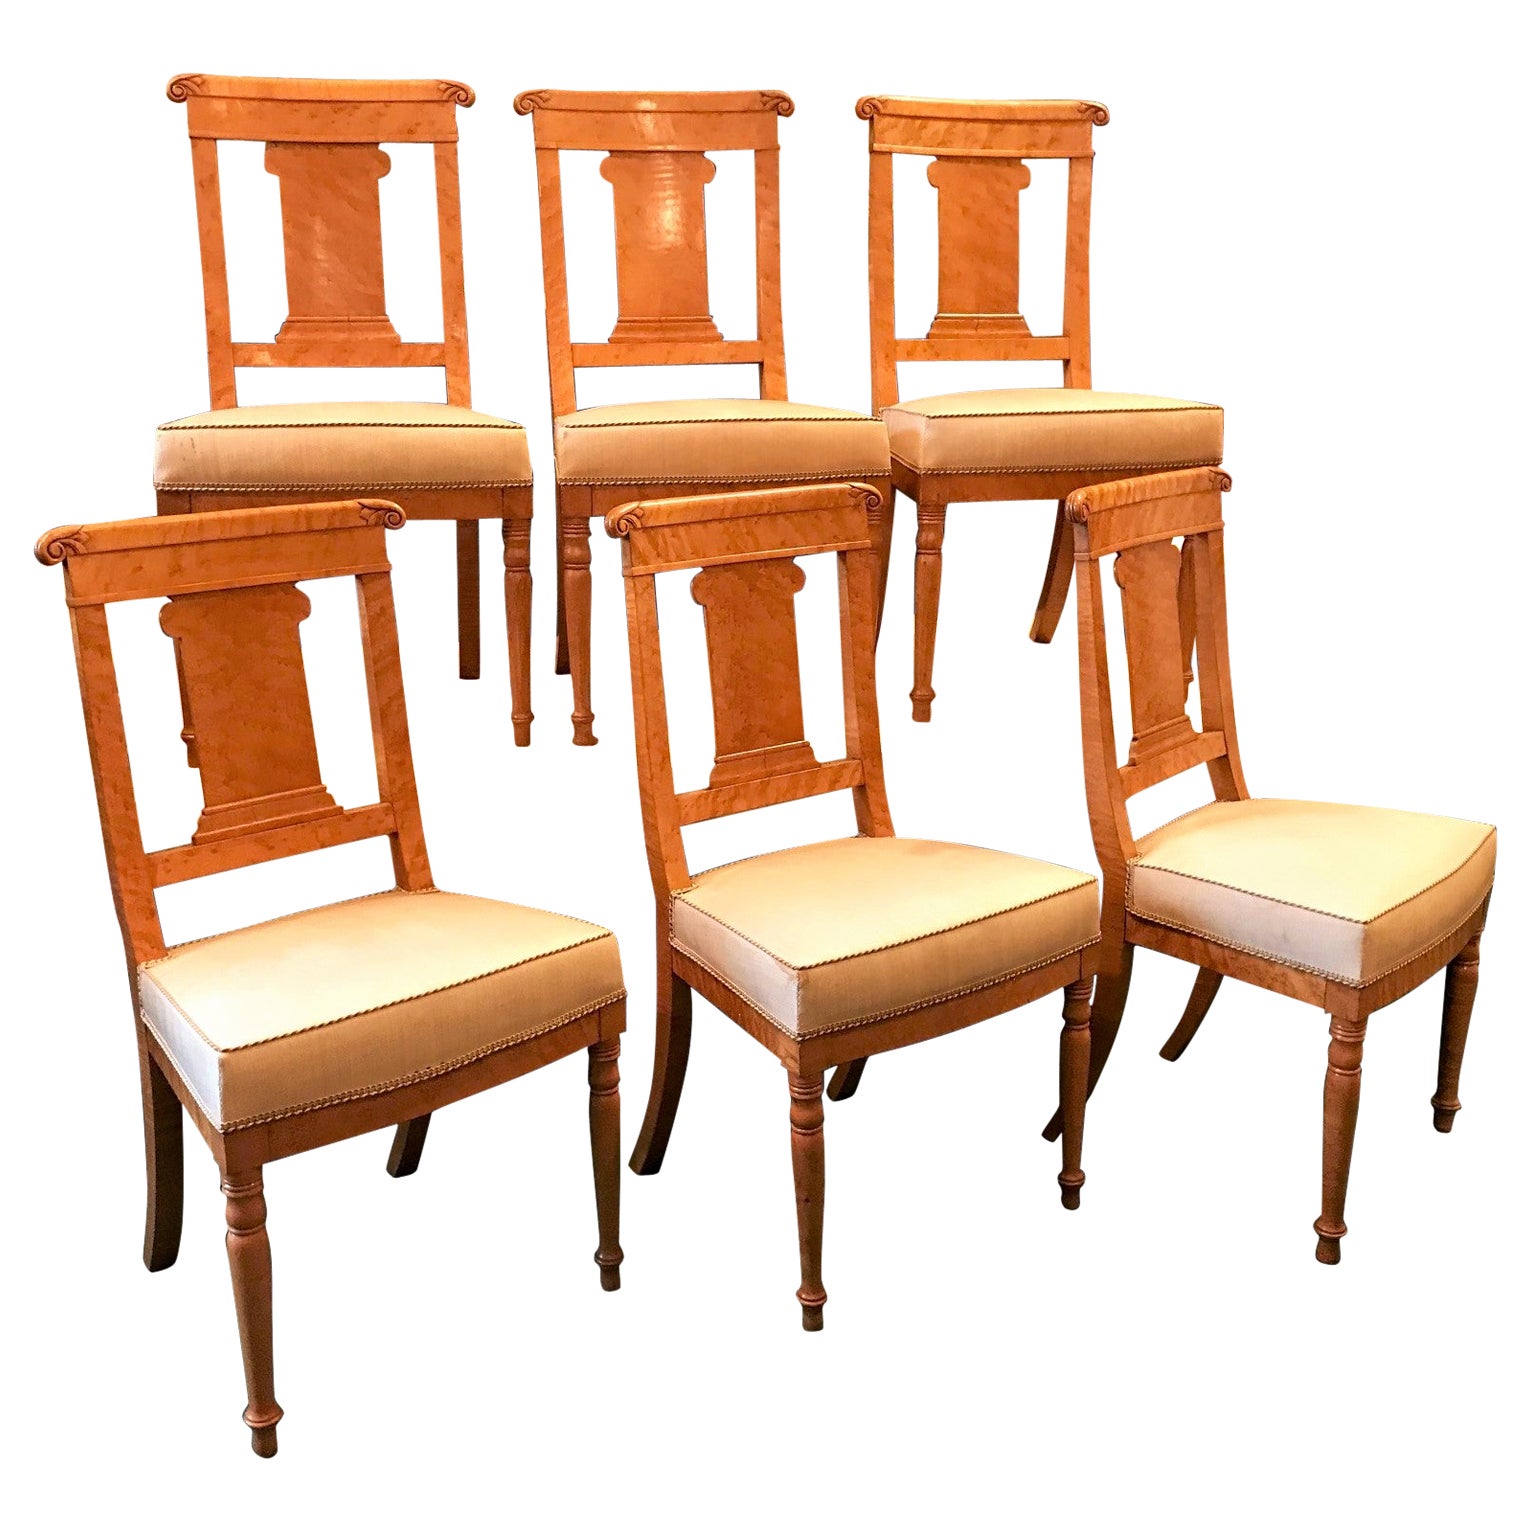 Set of 6 Neo-Classic Birdseye Maple Chairs, Brussels, Circa: 1825 For Sale